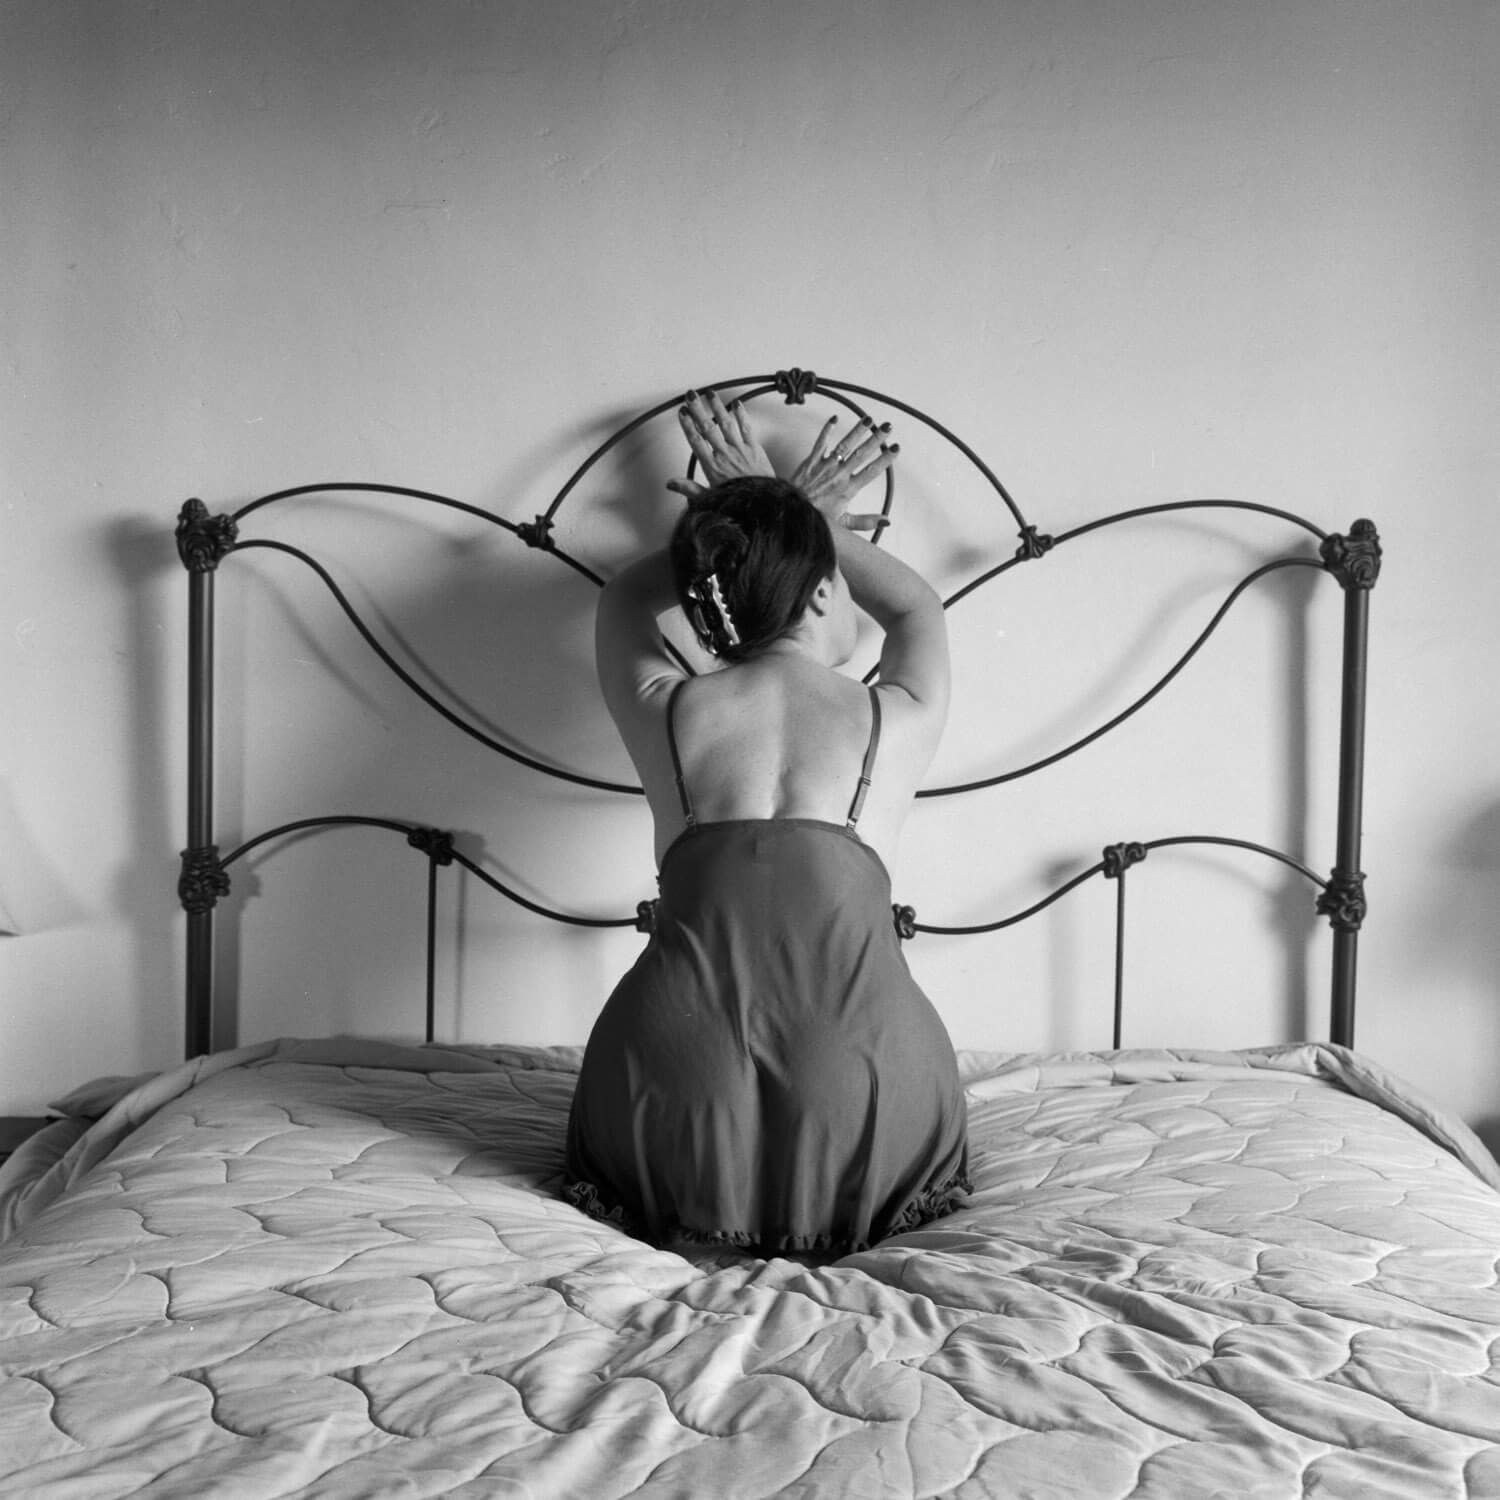 Model on antique bed - Here is a case where the photograph is all about symmetry. The subject is posed in dead center of the image. Shot with a Rollei 3.5f and Kodak T-MAX 400 film